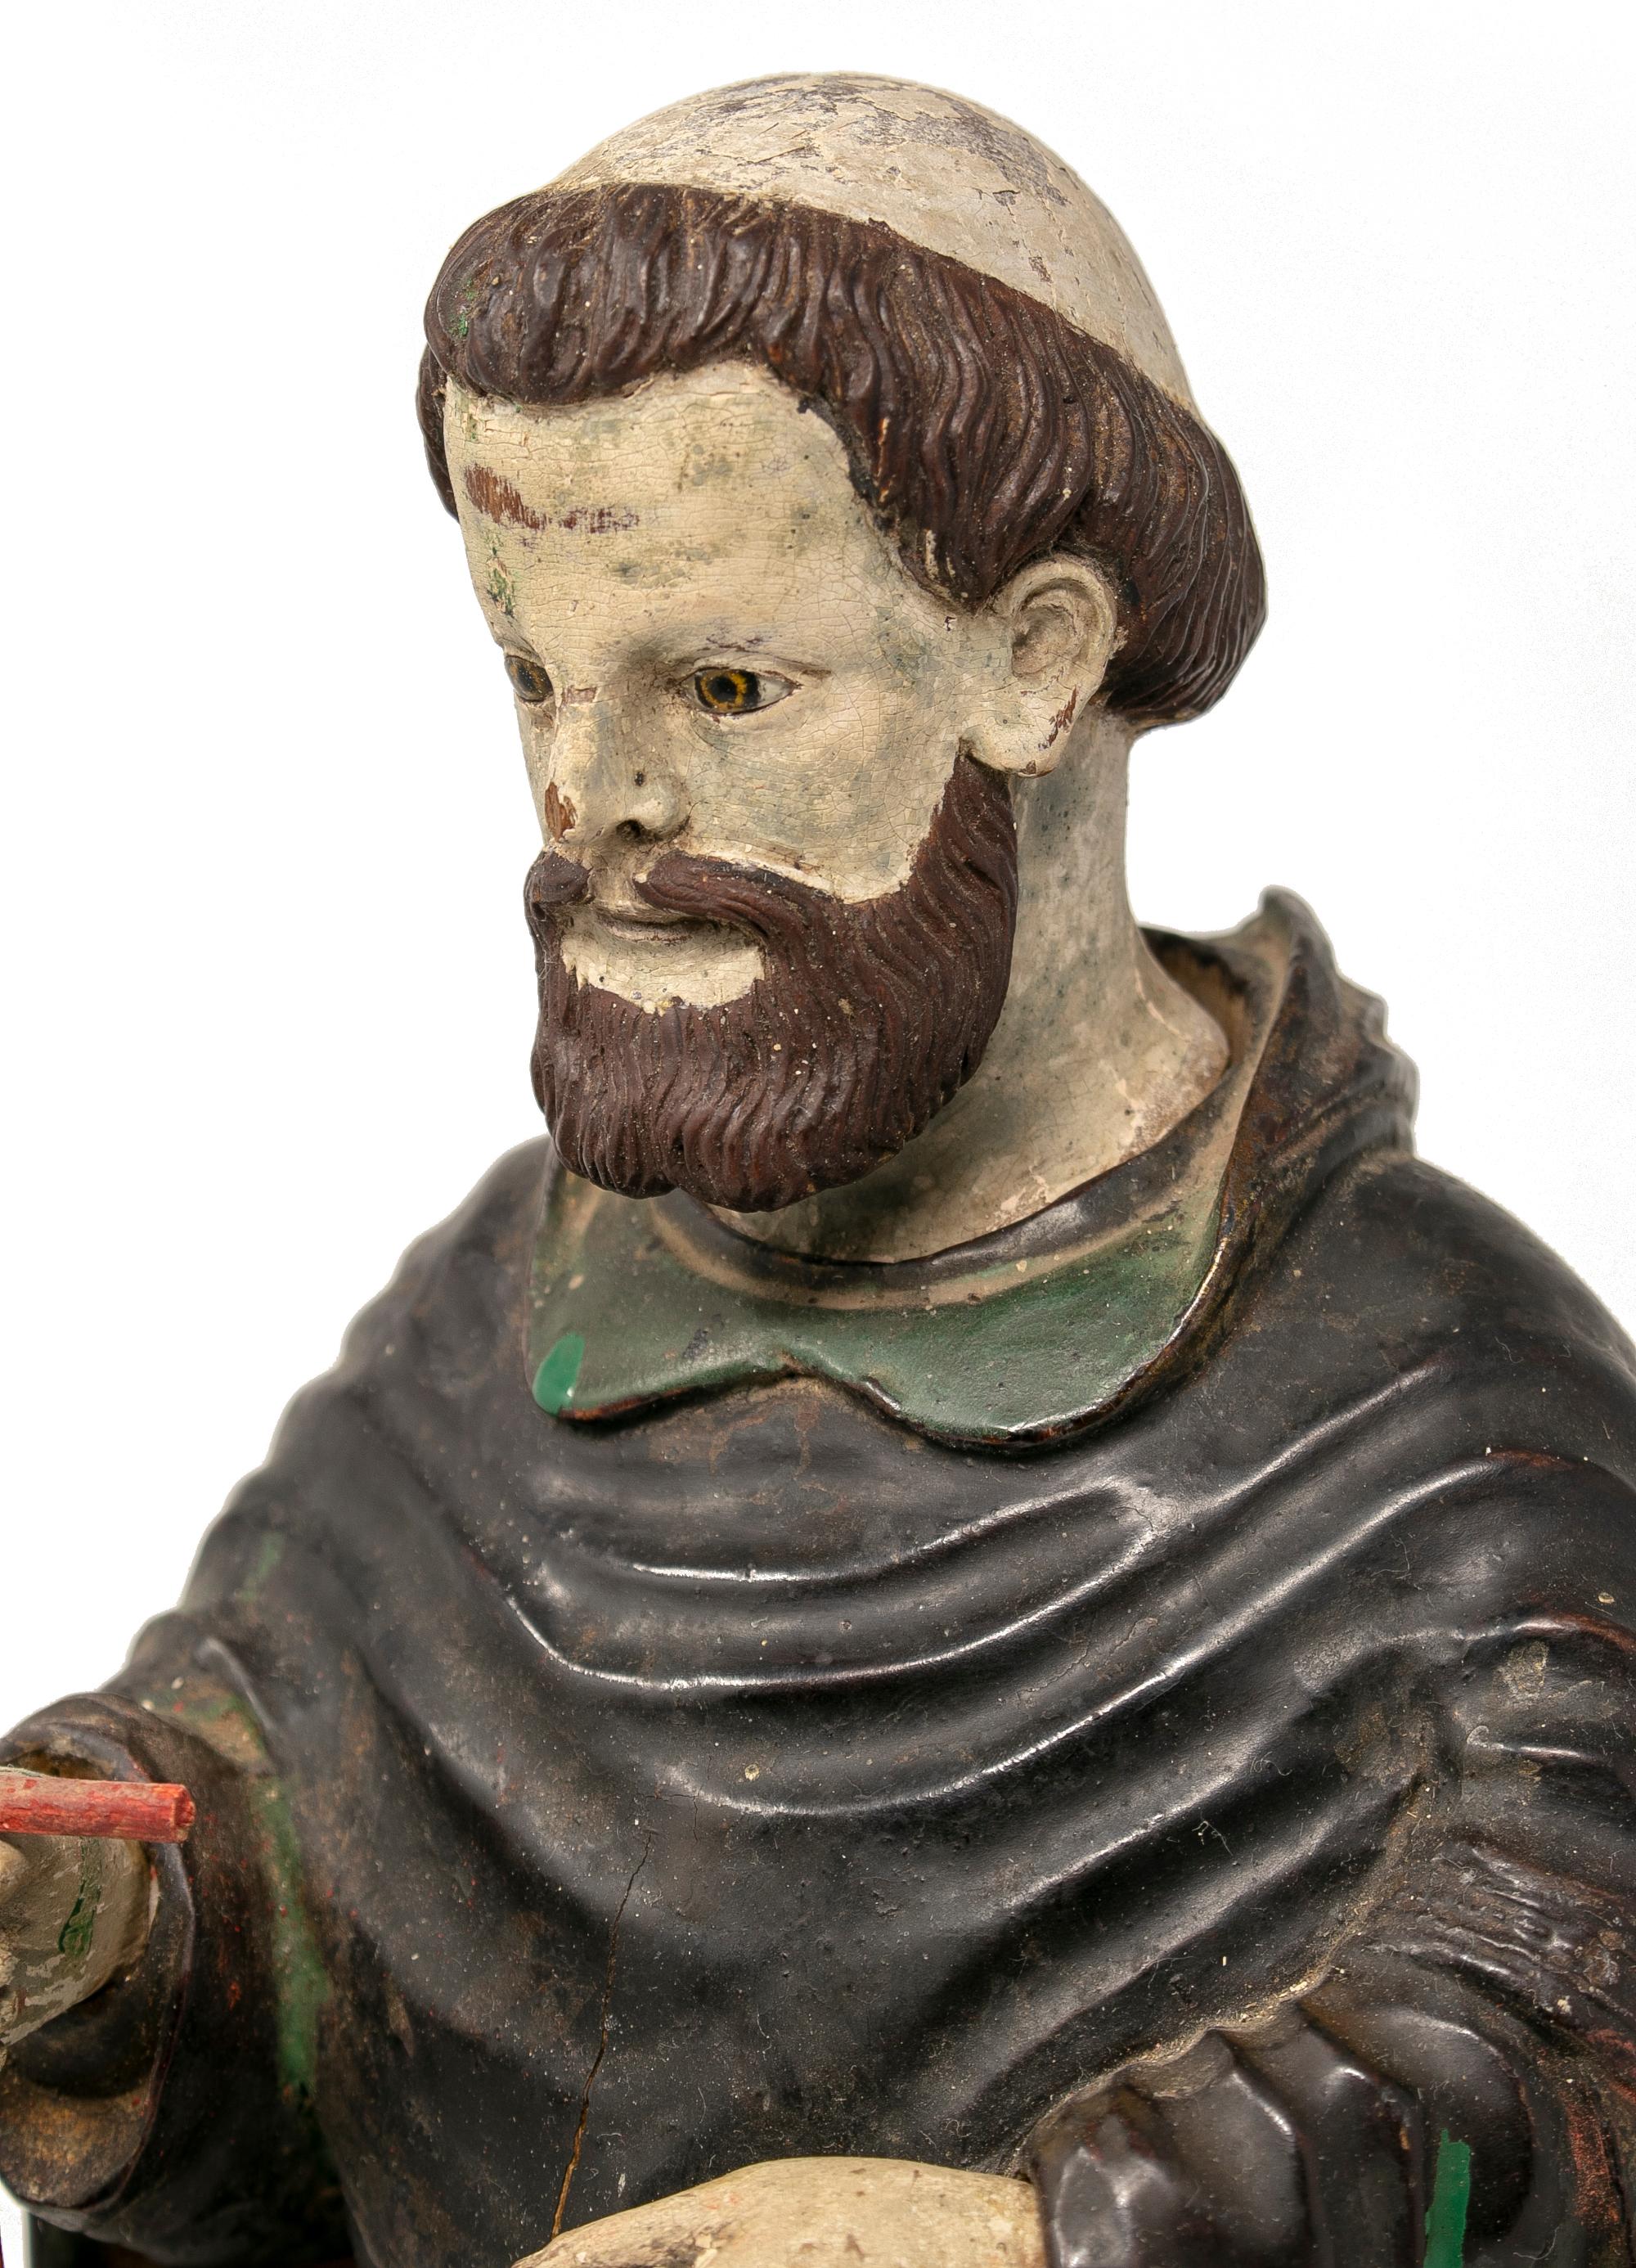 Mid-19th Century Spanish Saint Painted Wooden Figurative Sculpture For Sale 7